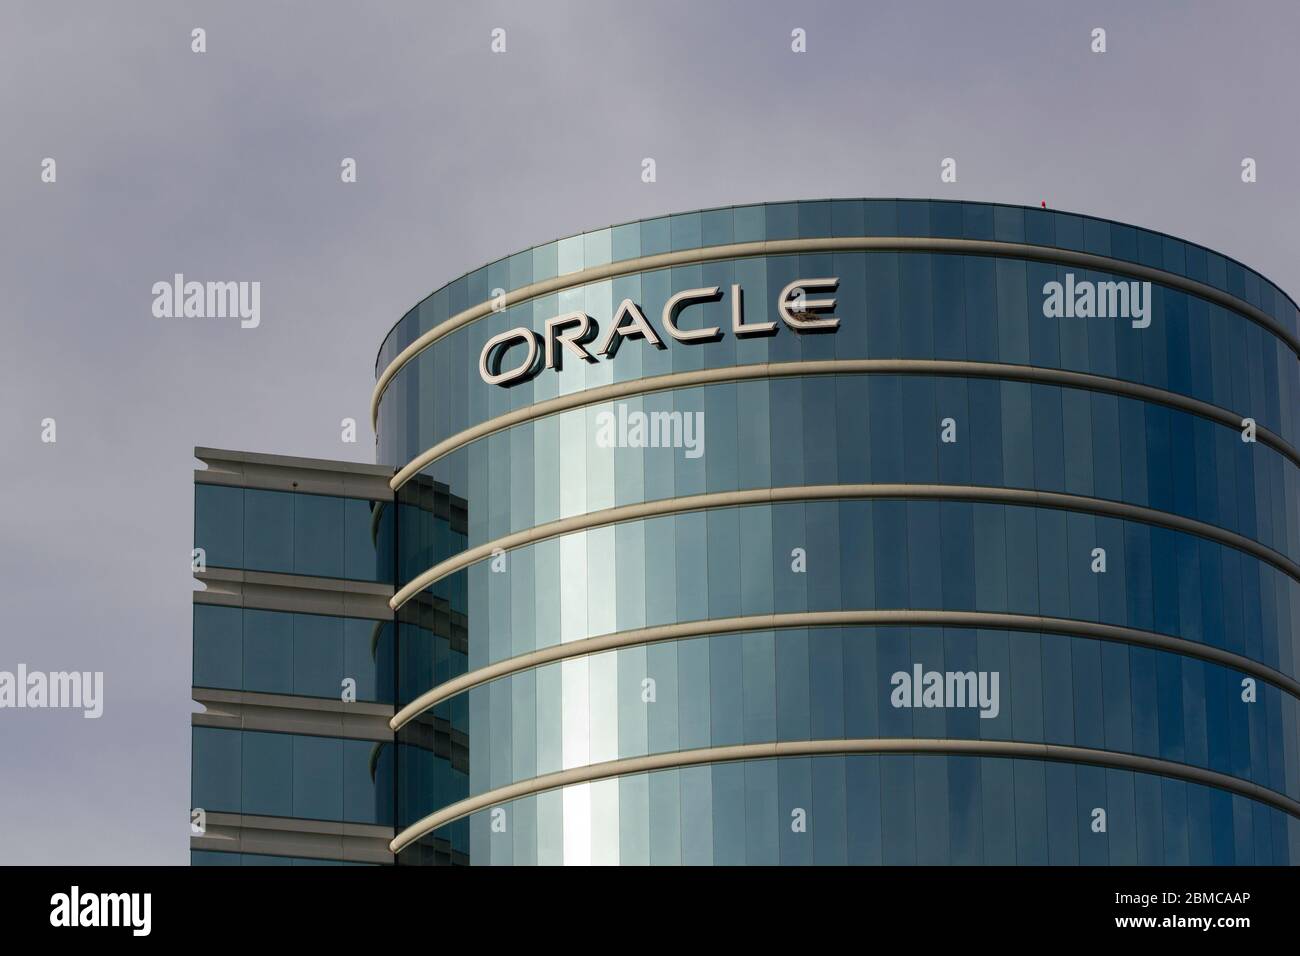 The Oracle sign is seen at Oracle Corporation Headquarters in Redwood Shores, California, on Feb 16, 2020. Stock Photo